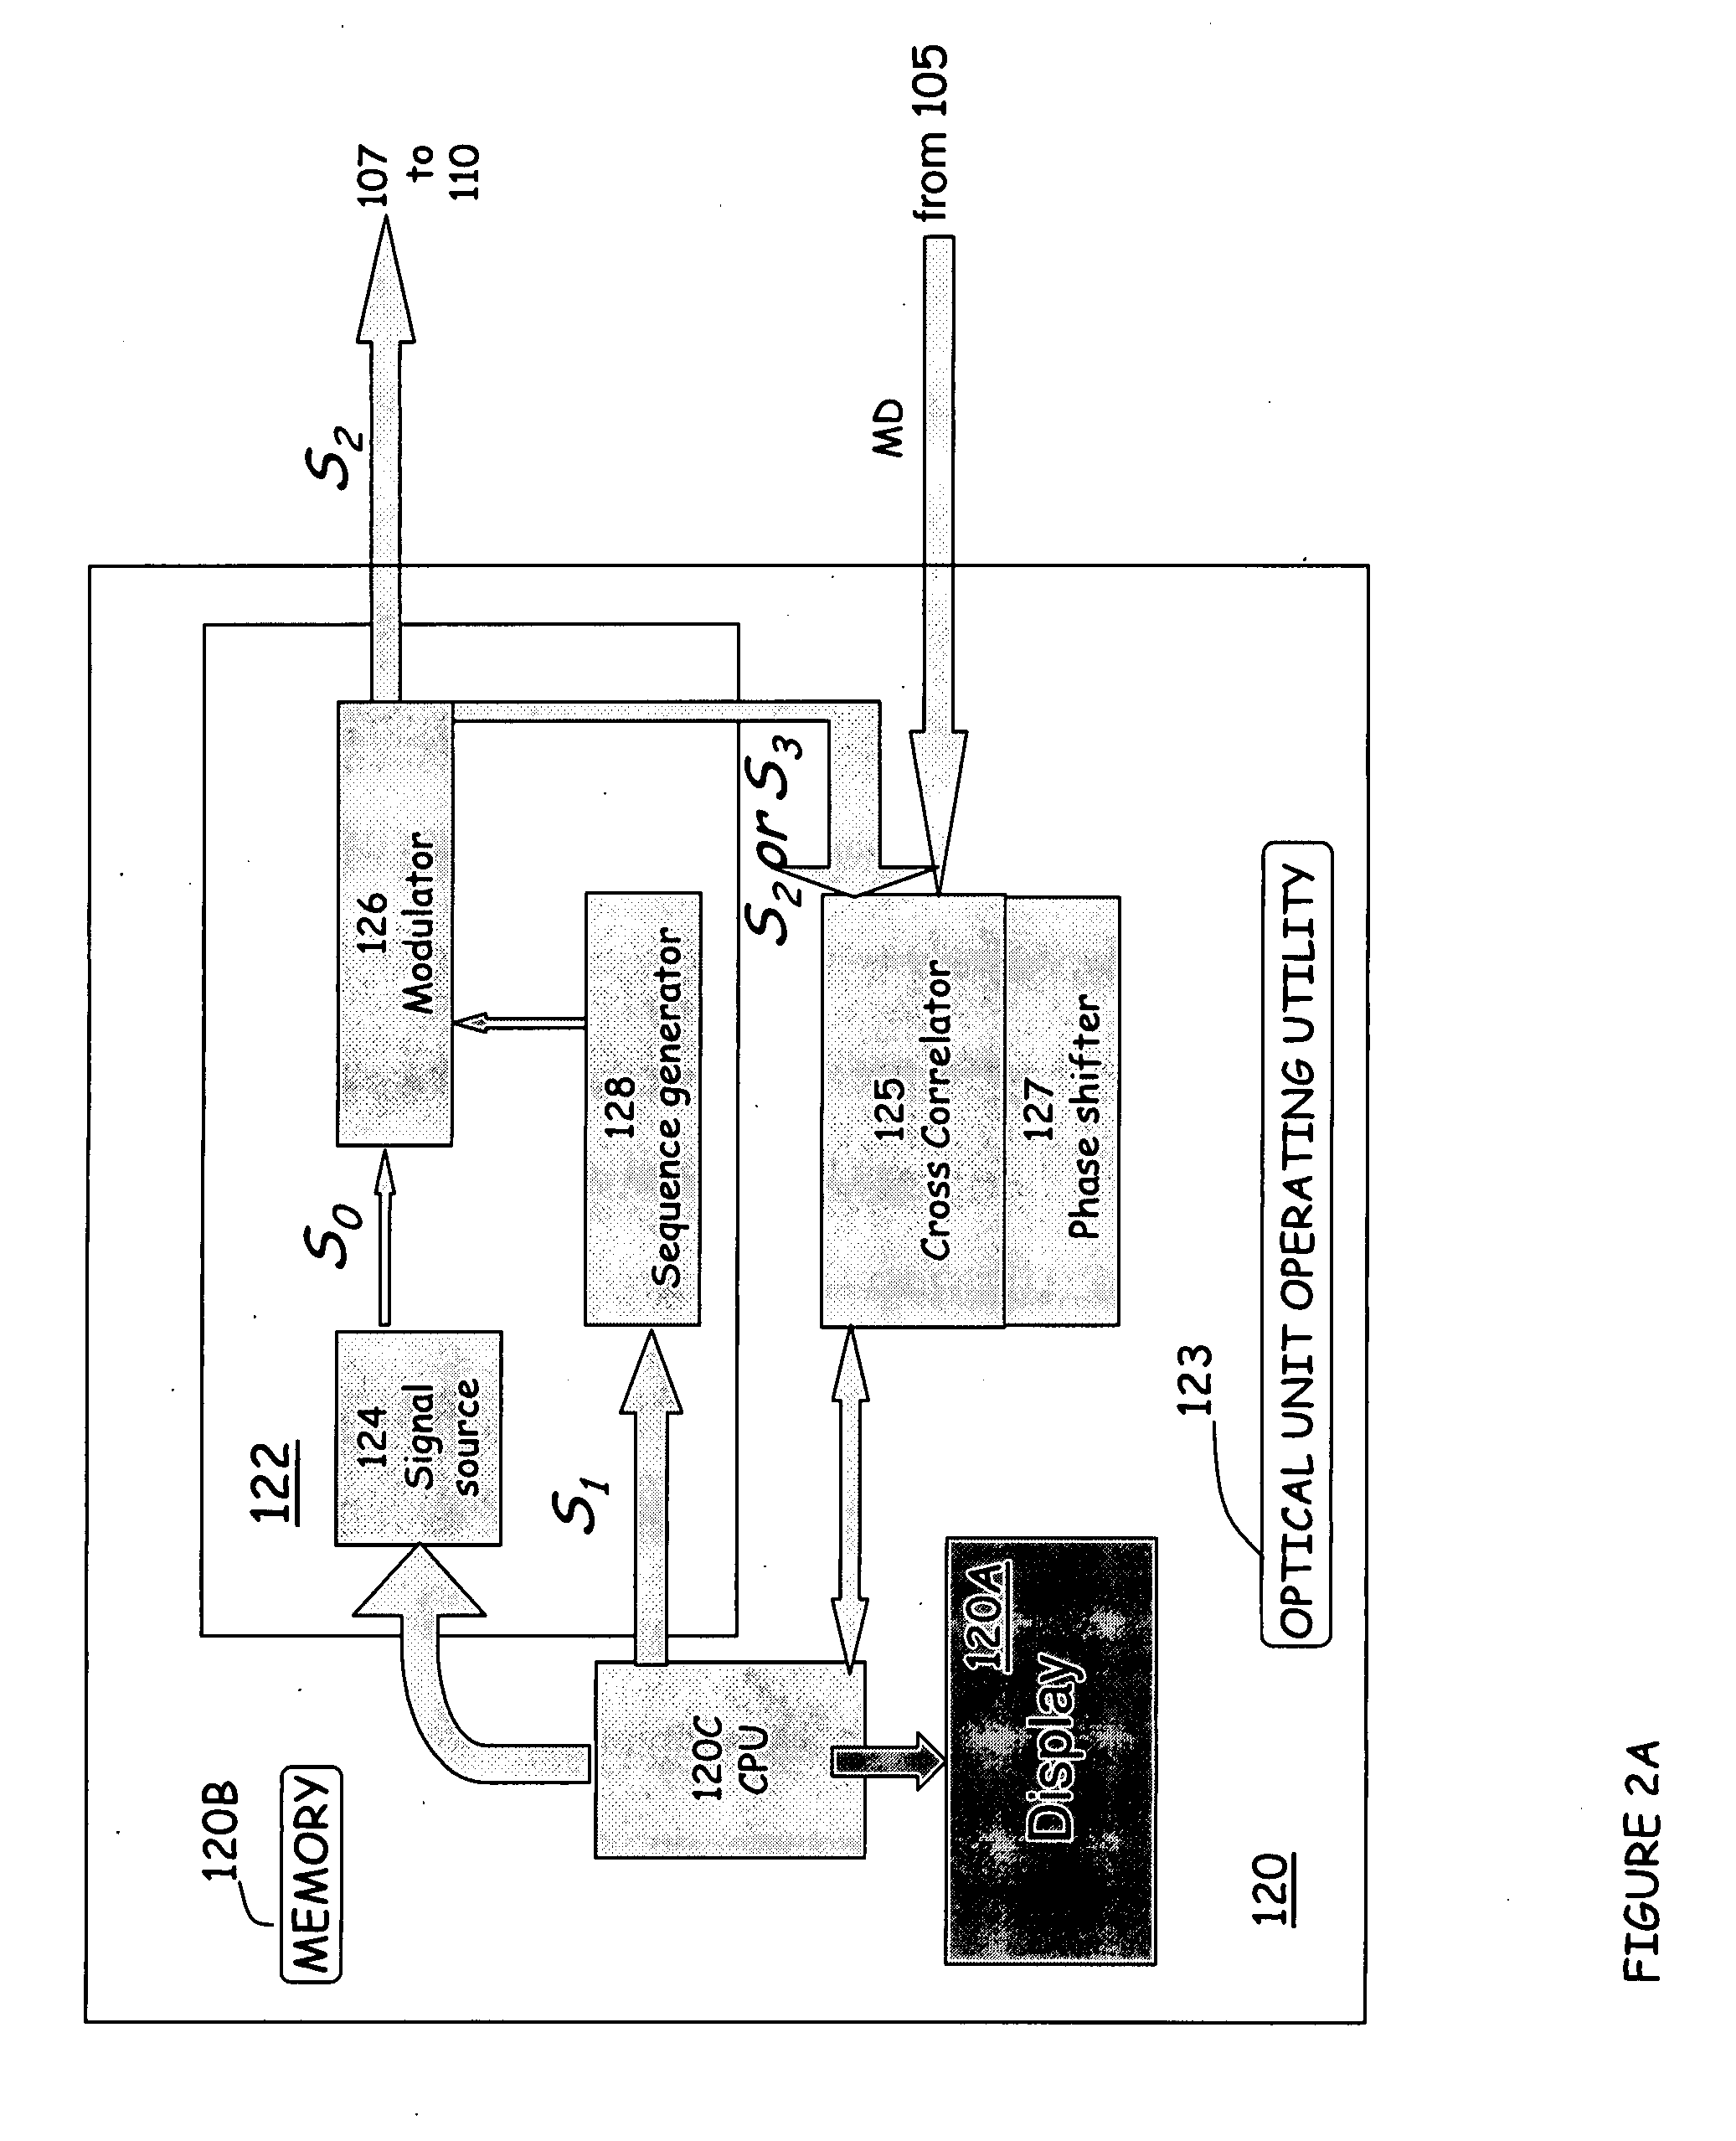 System and method for noninvasively monitoring conditions of a subject